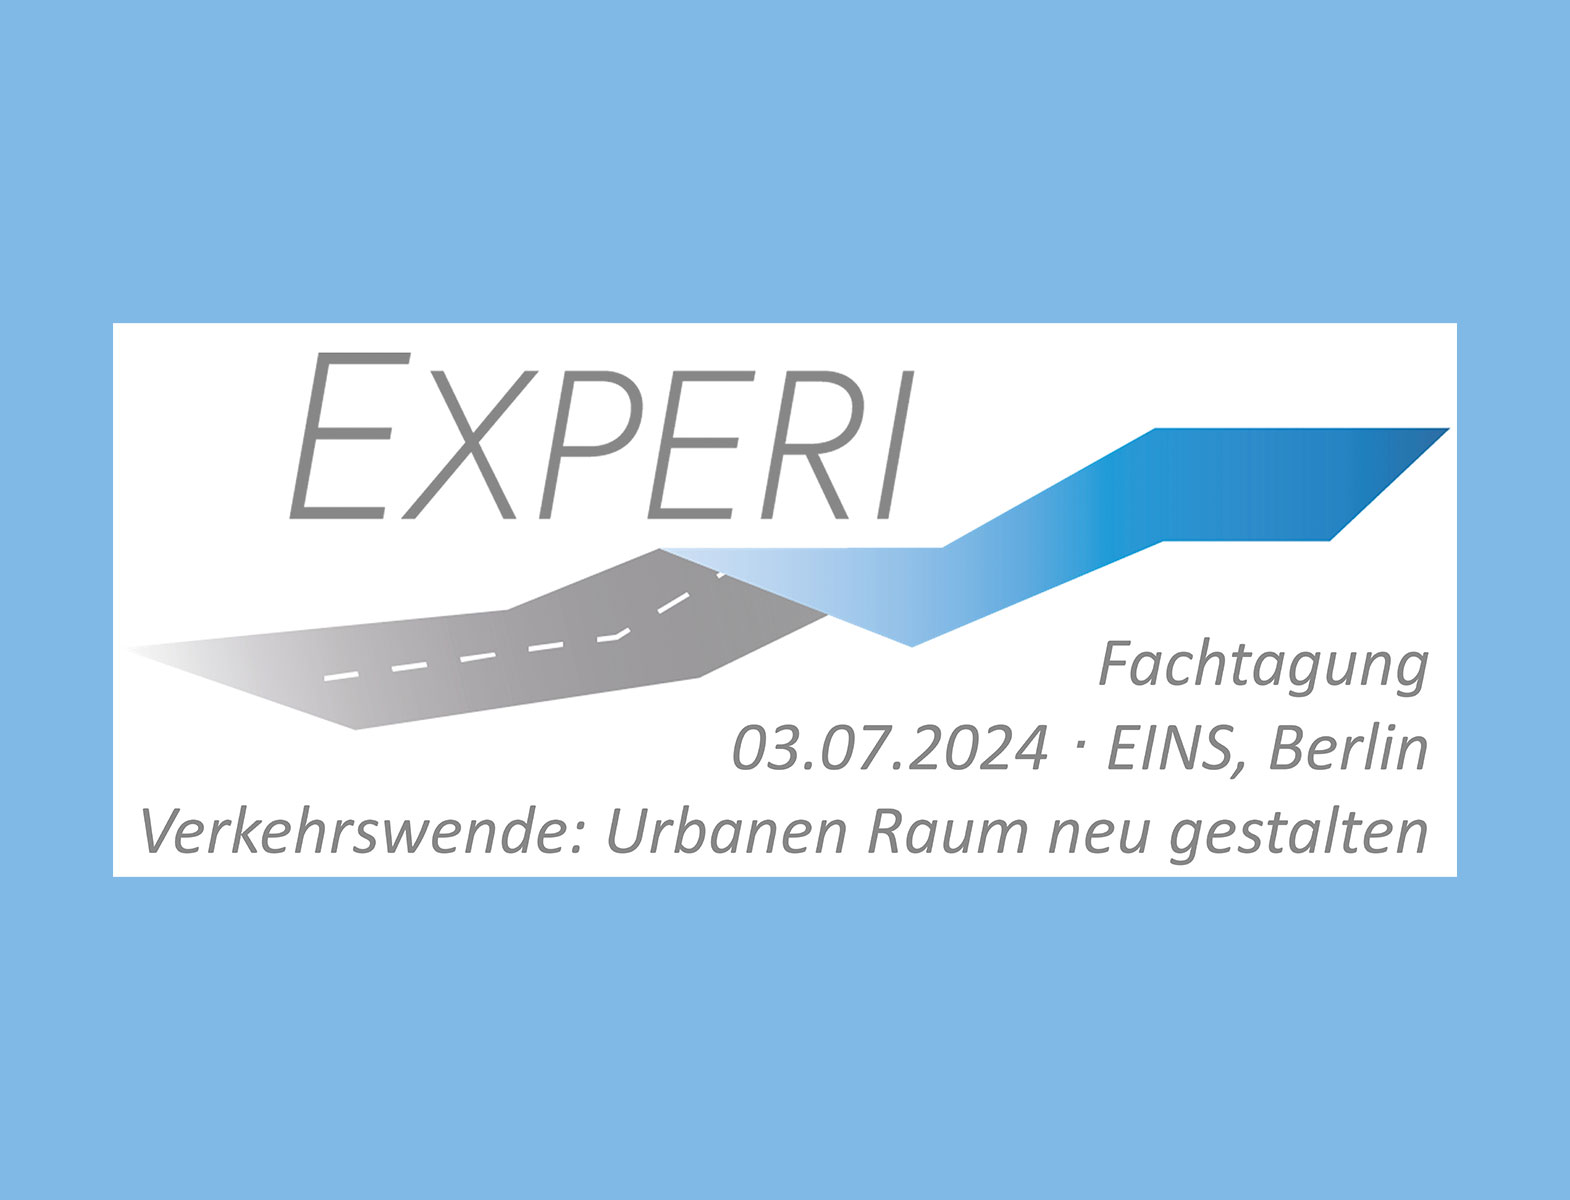 EXPERI symposium on transport transition: Redesigning urban space on 03 July